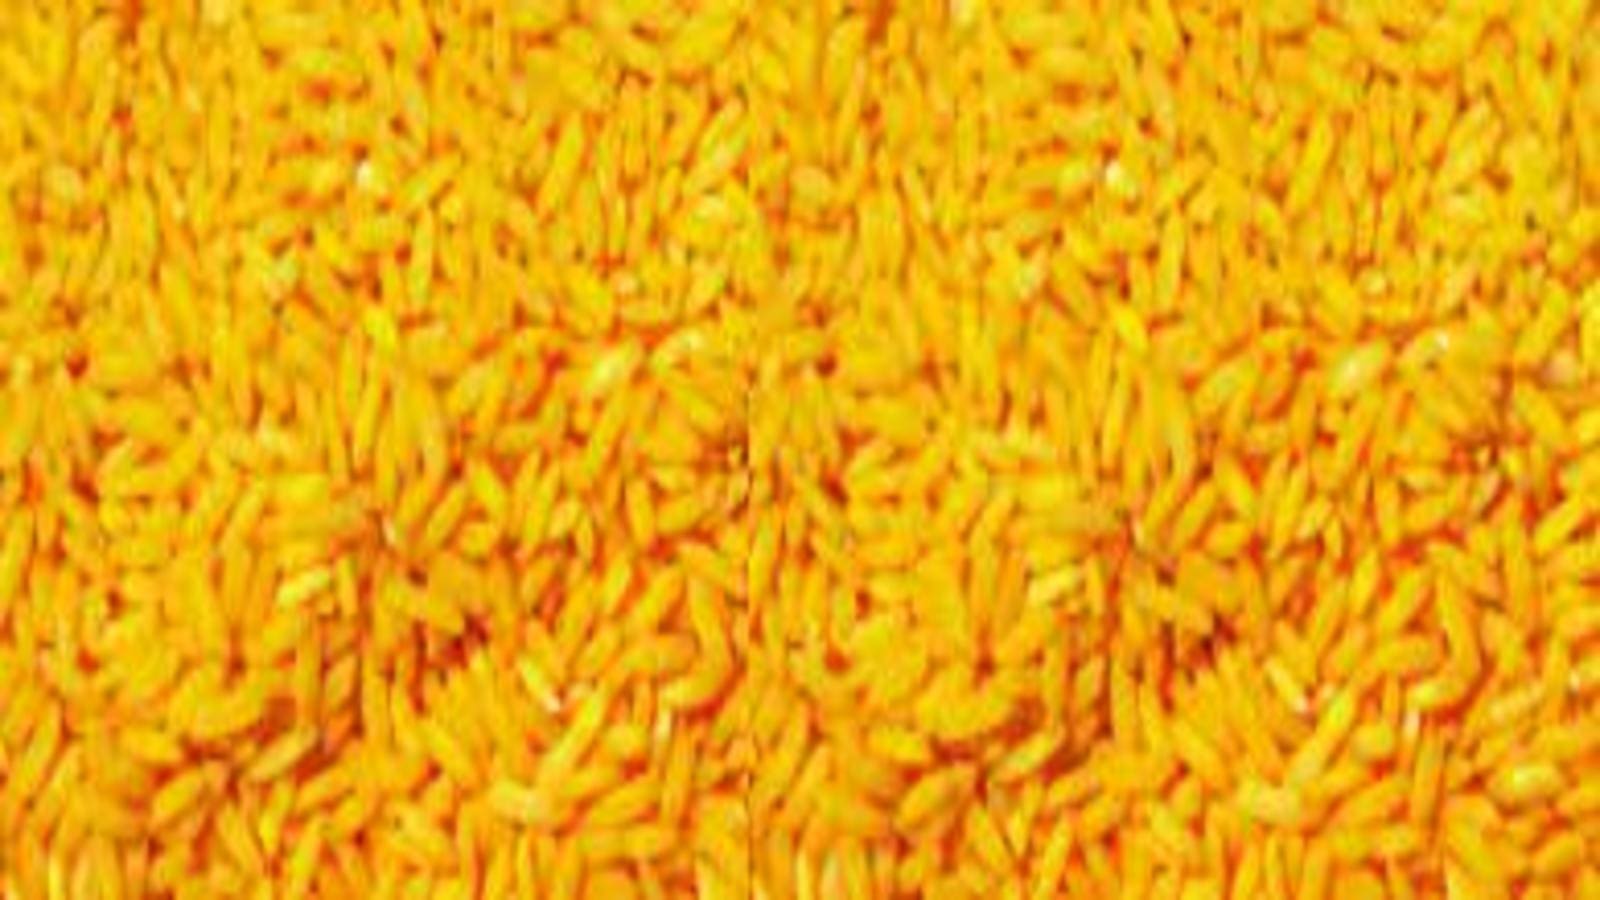 Philippines nods commercial cultivation of GE Golden Rice to curb nutrient deficiency